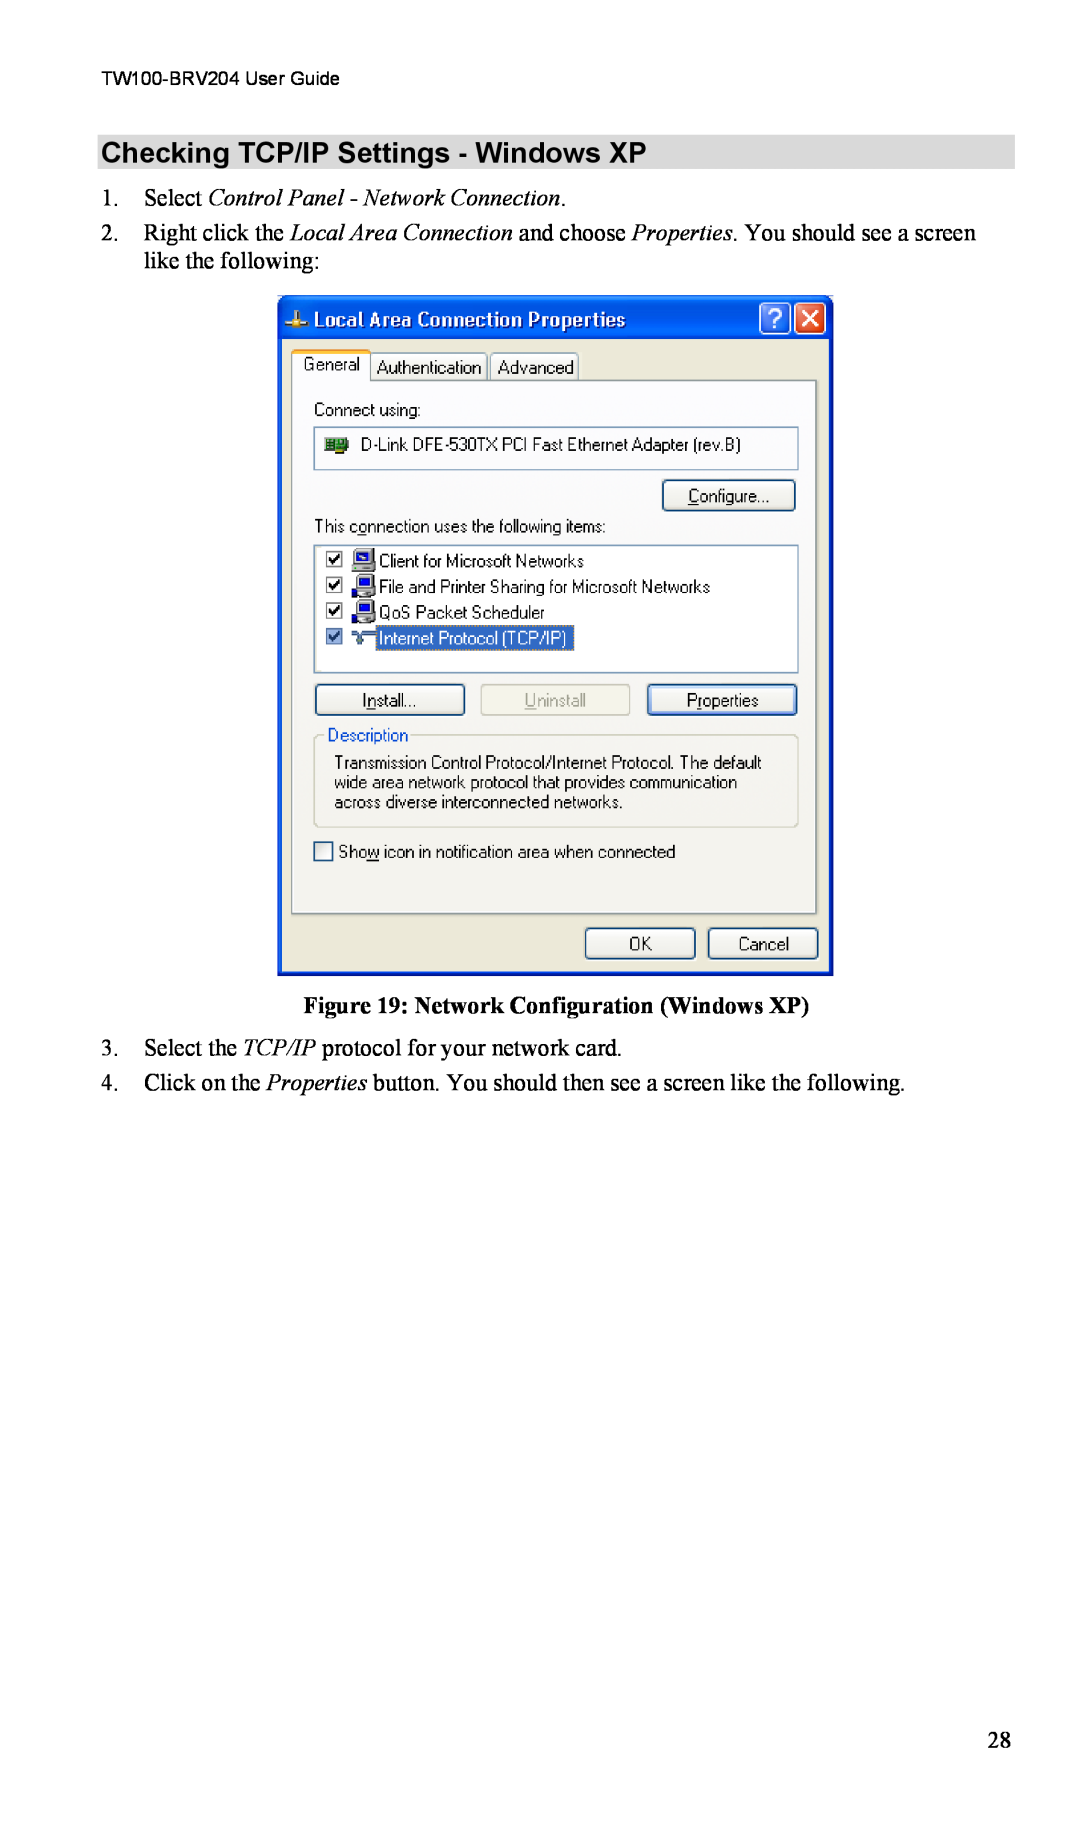 TRENDnet VPN Firewall Router manual Checking TCP/IP Settings - Windows XP, Select Control Panel - Network Connection 